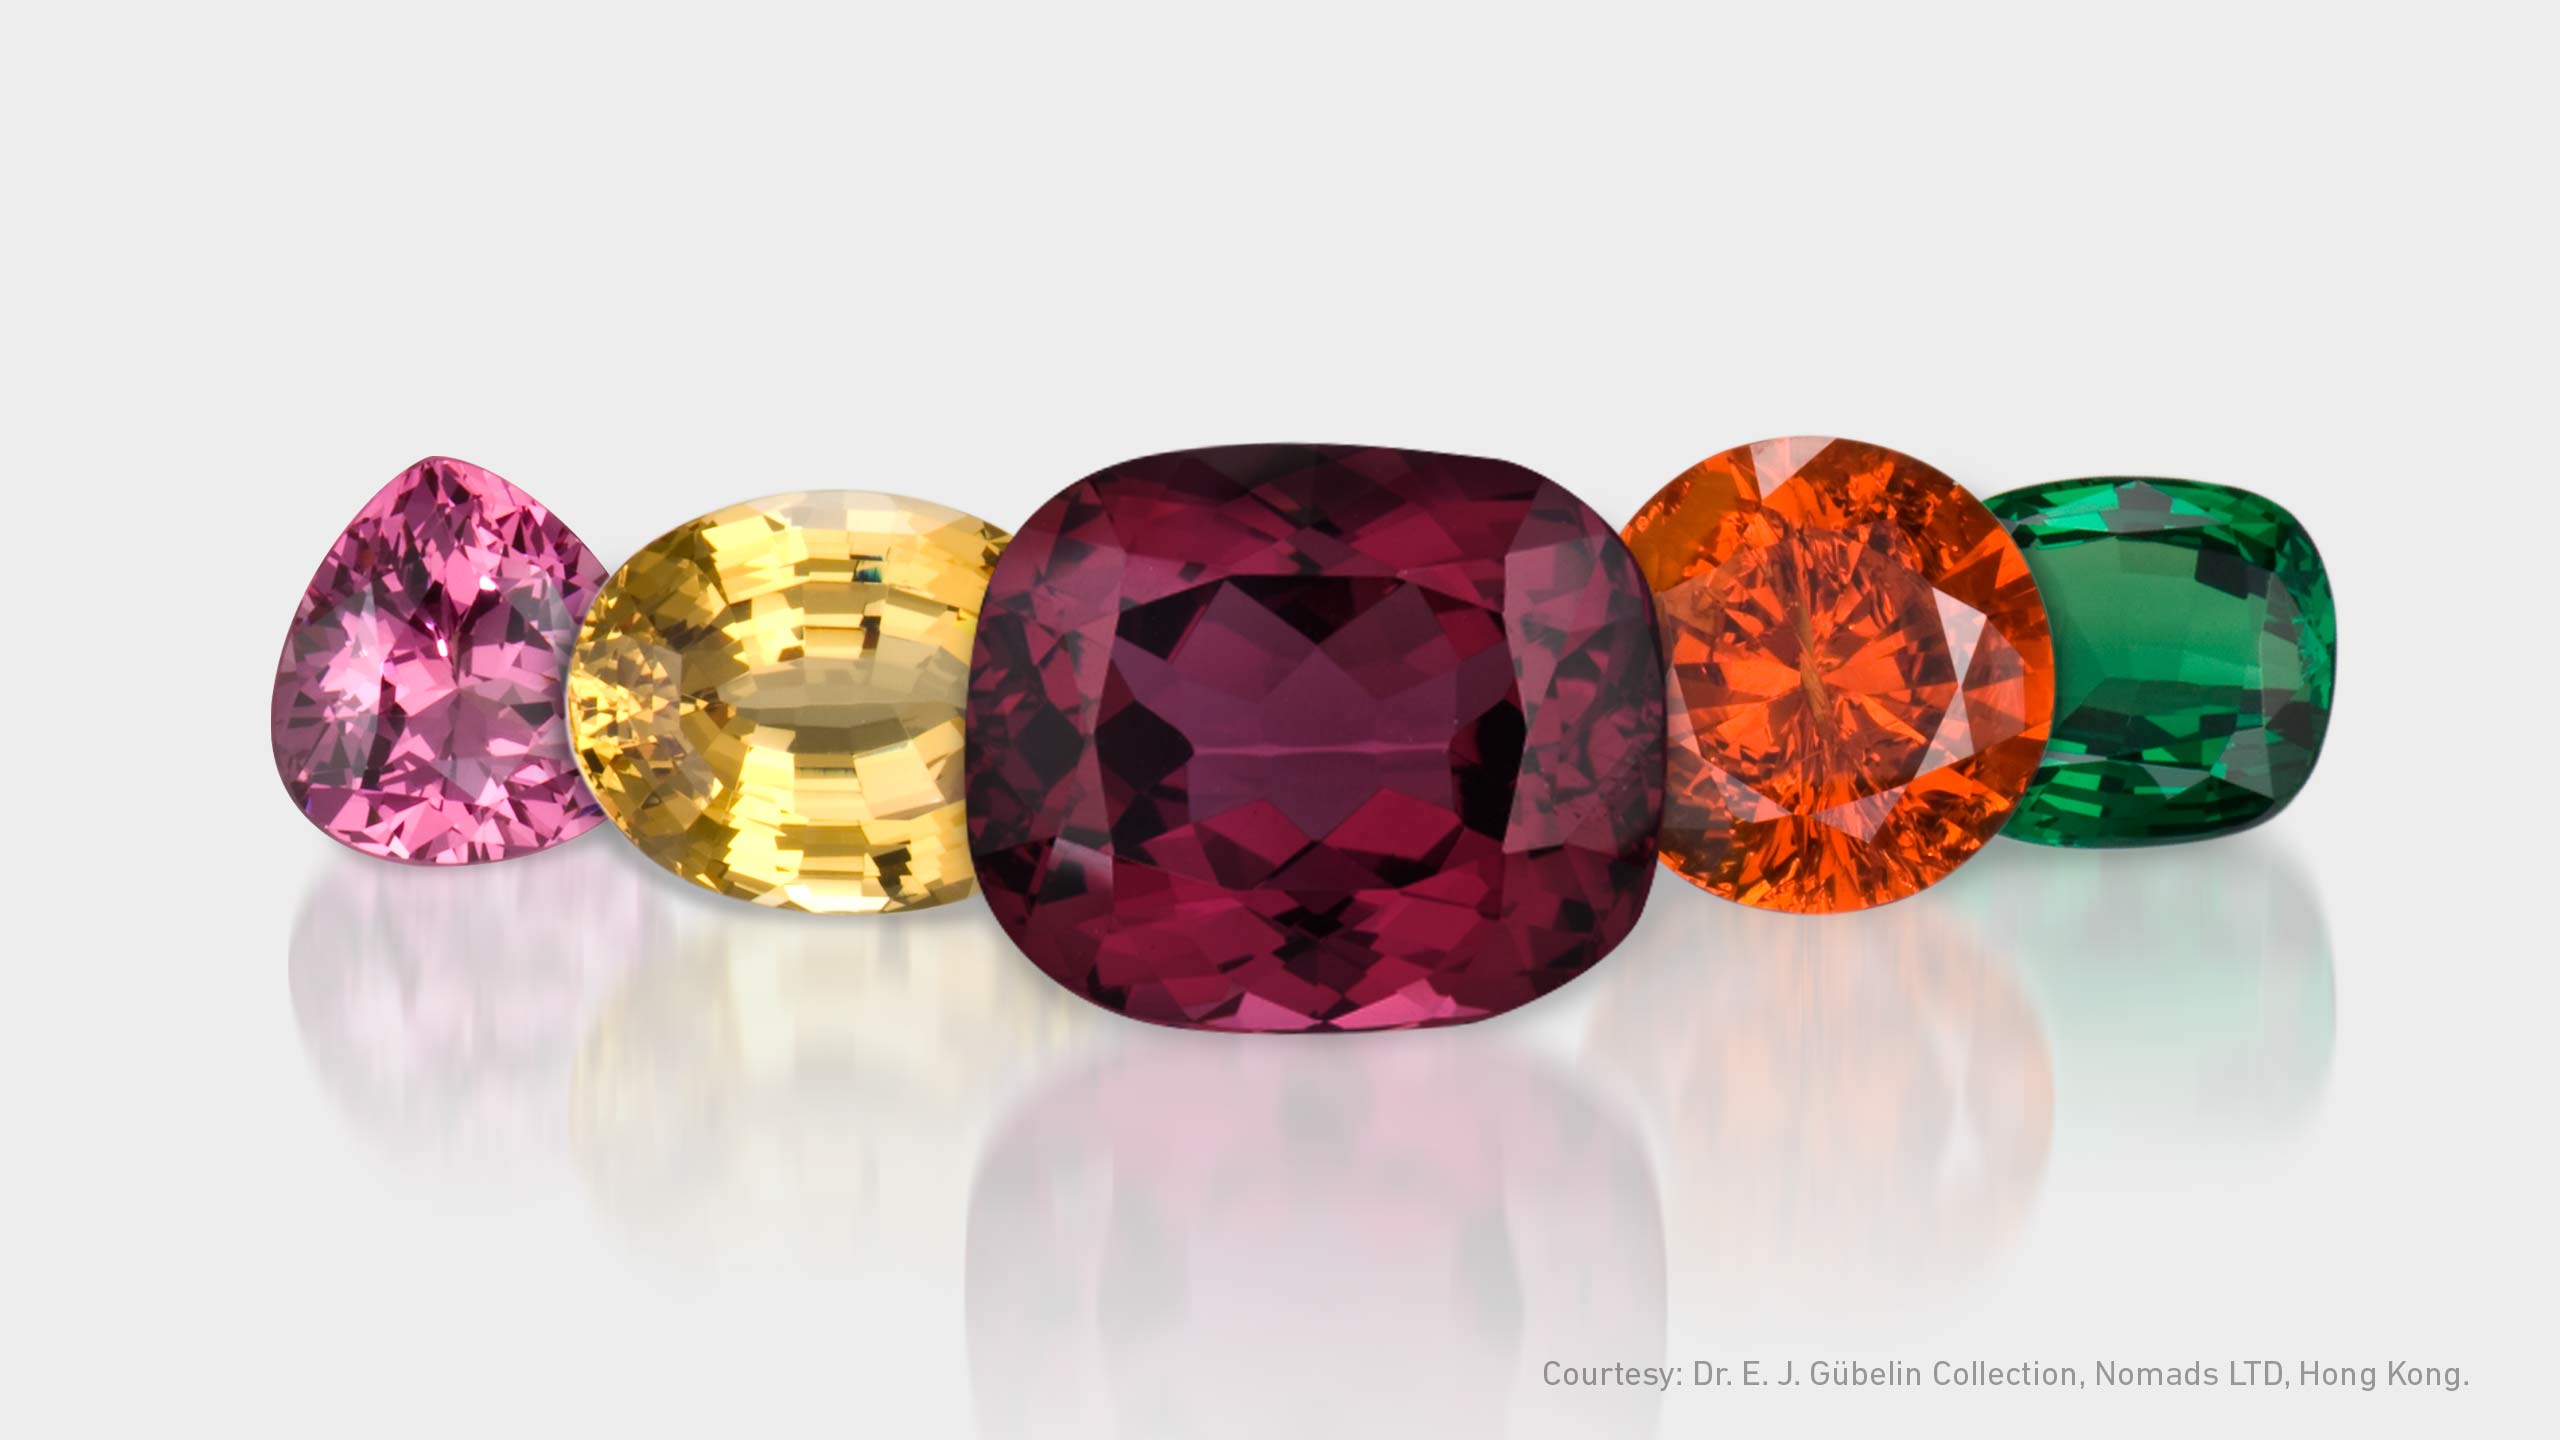 A collection of colorful gemstones